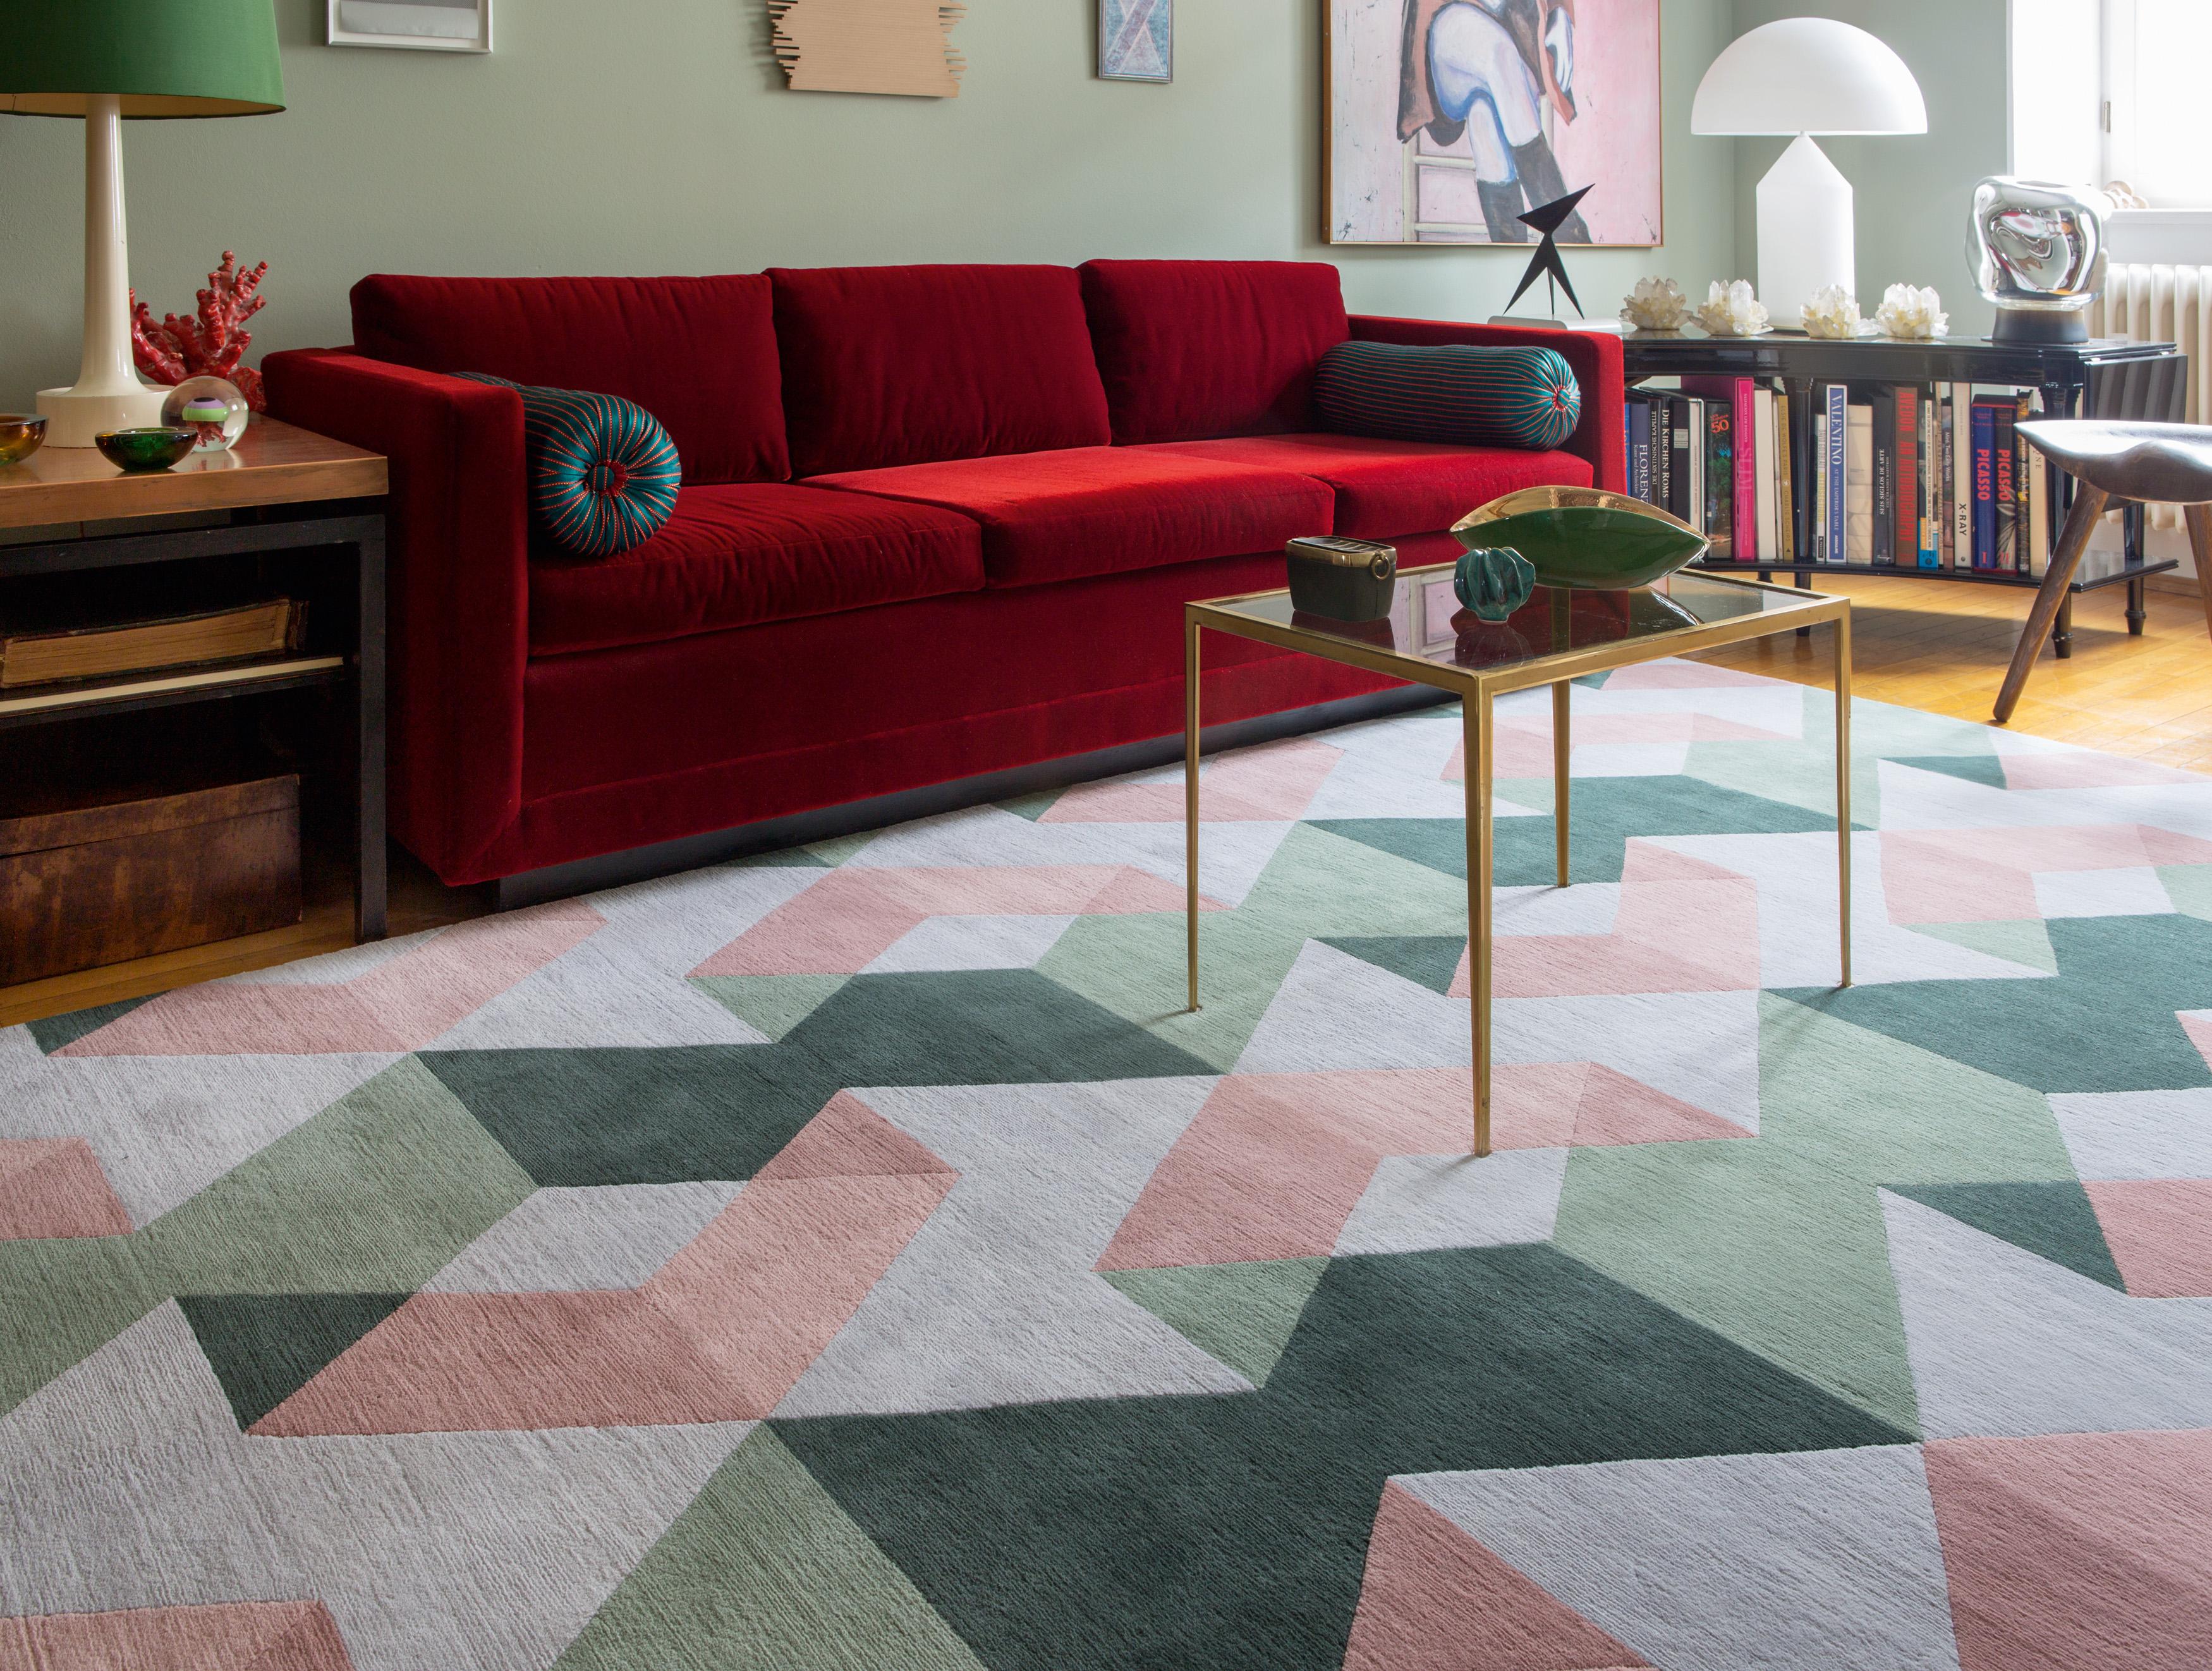 A new addition by our in-house studio, Fold is abstract in theme and handcrafted in Tibetan wool in a fresh palette of green, pink and neutral tones.

Craftsmanship: hand-knotted Tibetan wool
Technique: cut pile.

For non-US pricing, please inquire